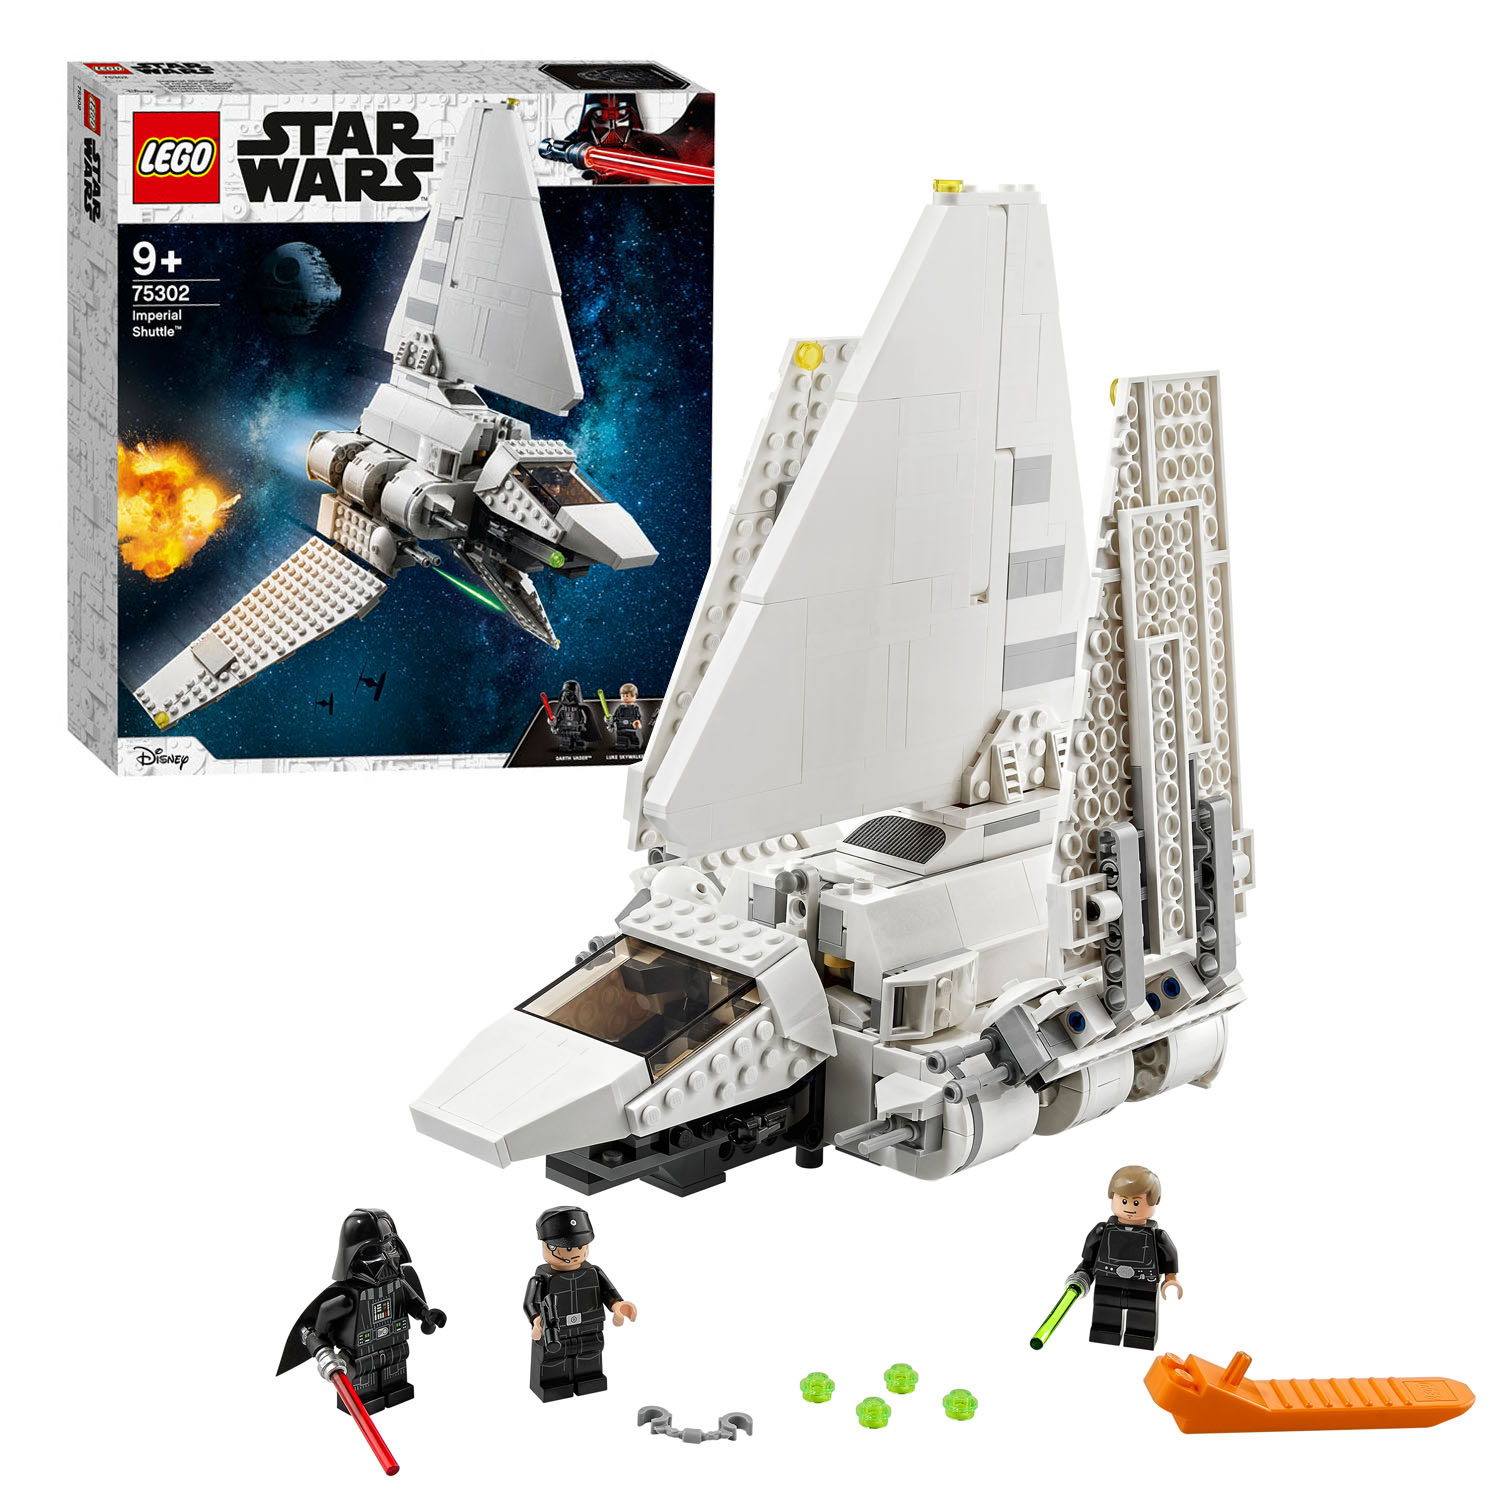 cafe Afstoting Suri Lego Star Wars 75302 Imperial Shuttle | Thimble Toys